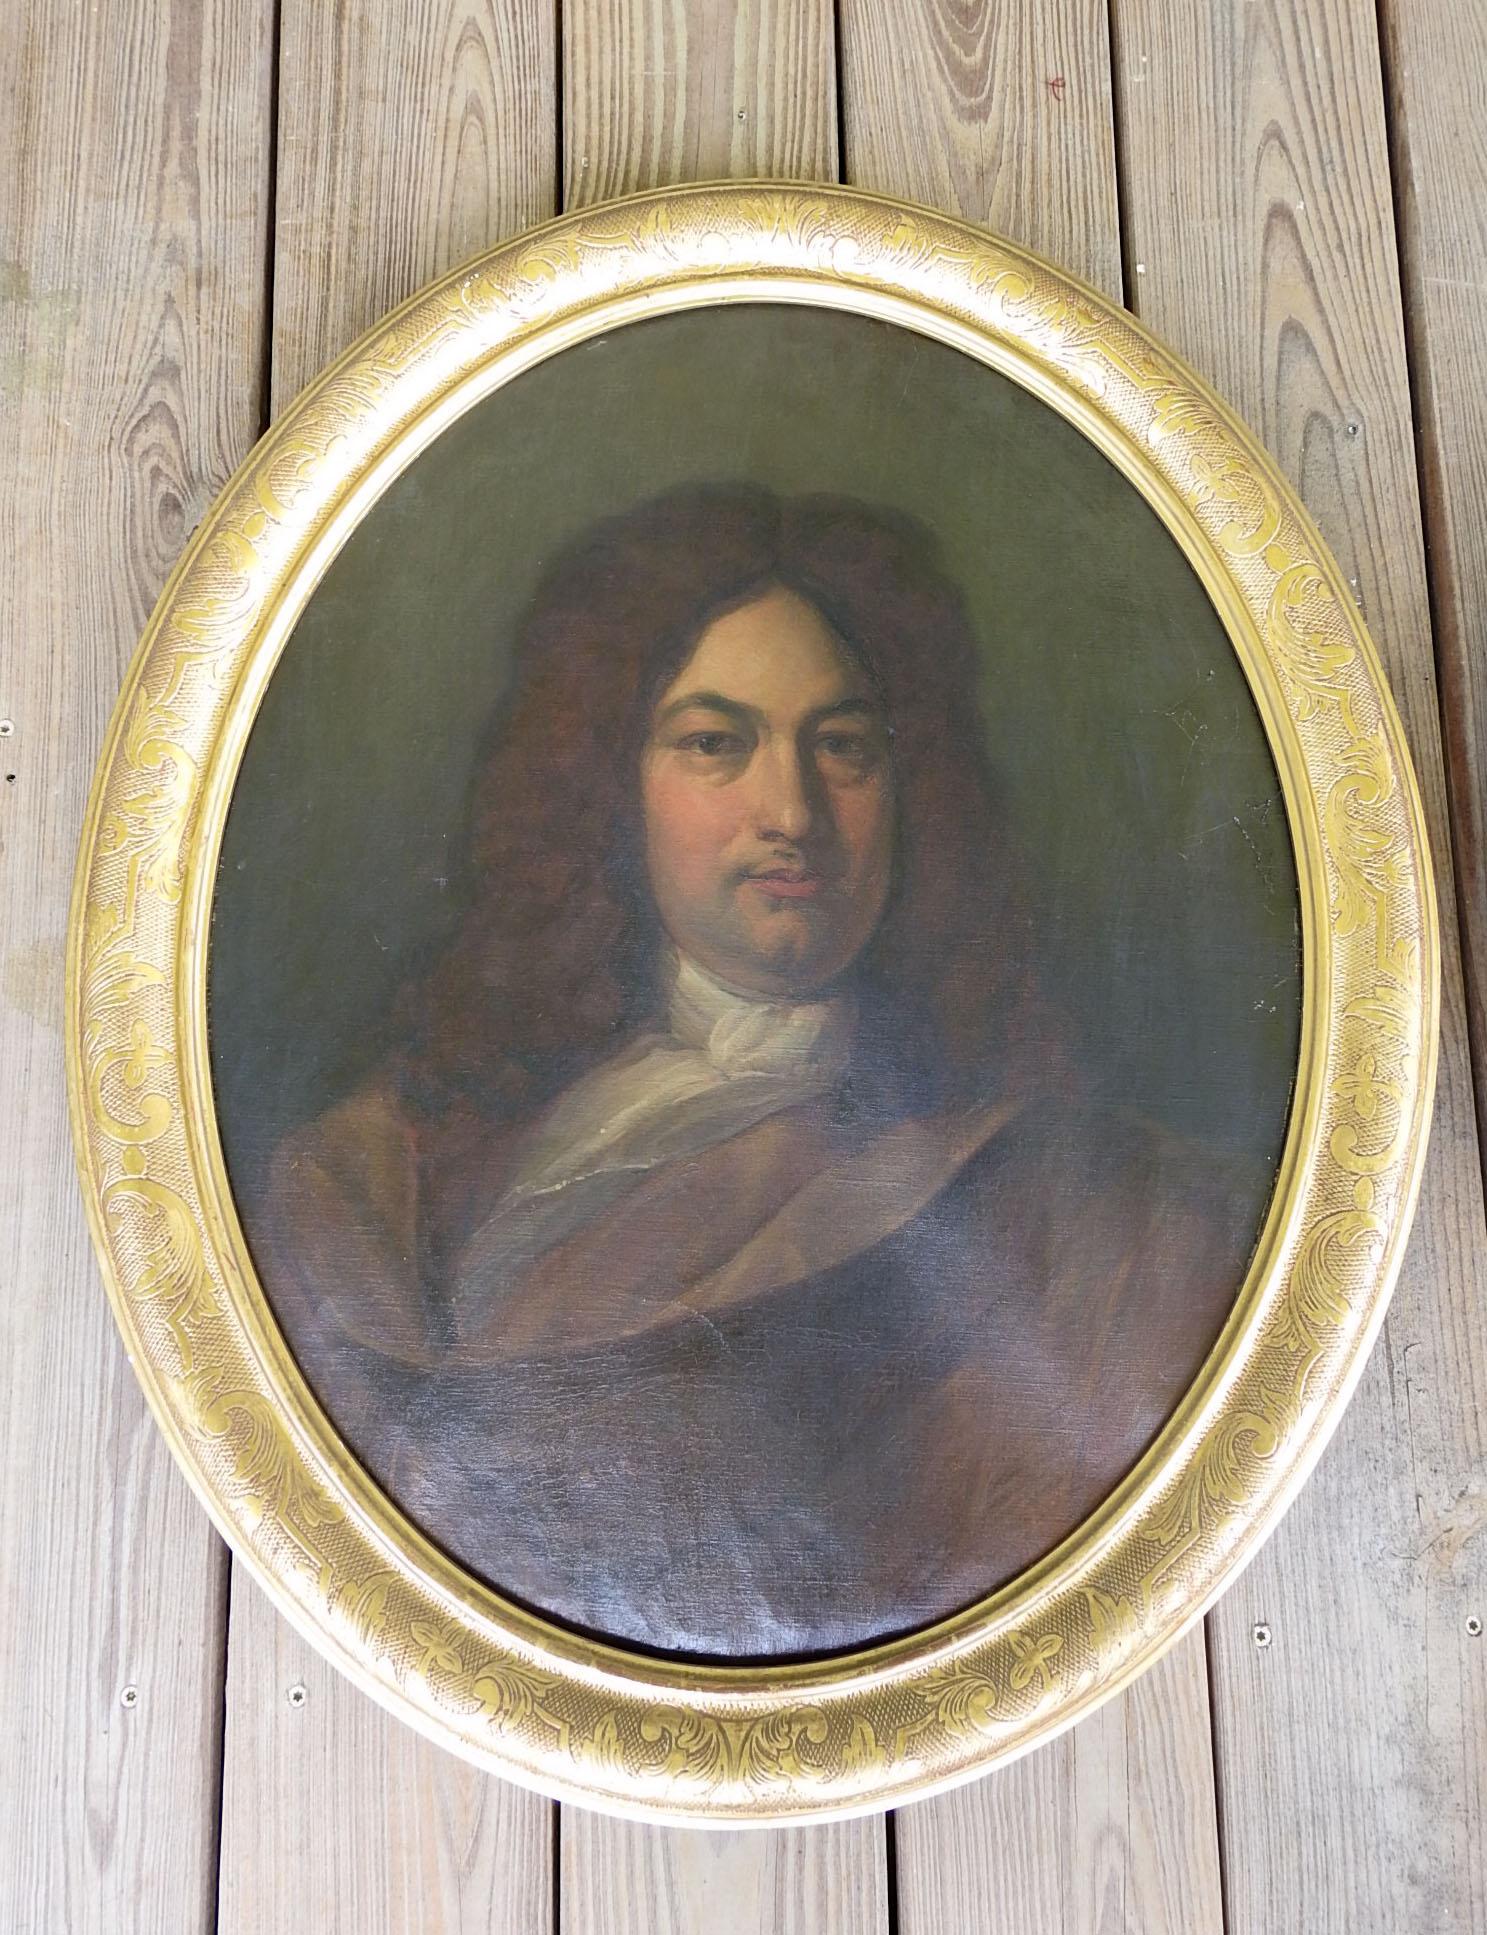 Pair of antique oil on canvas portraits of Peter and Ester Ochs. Writing on back of stretchers, Peter Ochs (1659-1706) and Ester Ochs (Mitz) (1670-1733). Likely from Basel, Switzerland whose decendents moved to the US. These were probably painted in